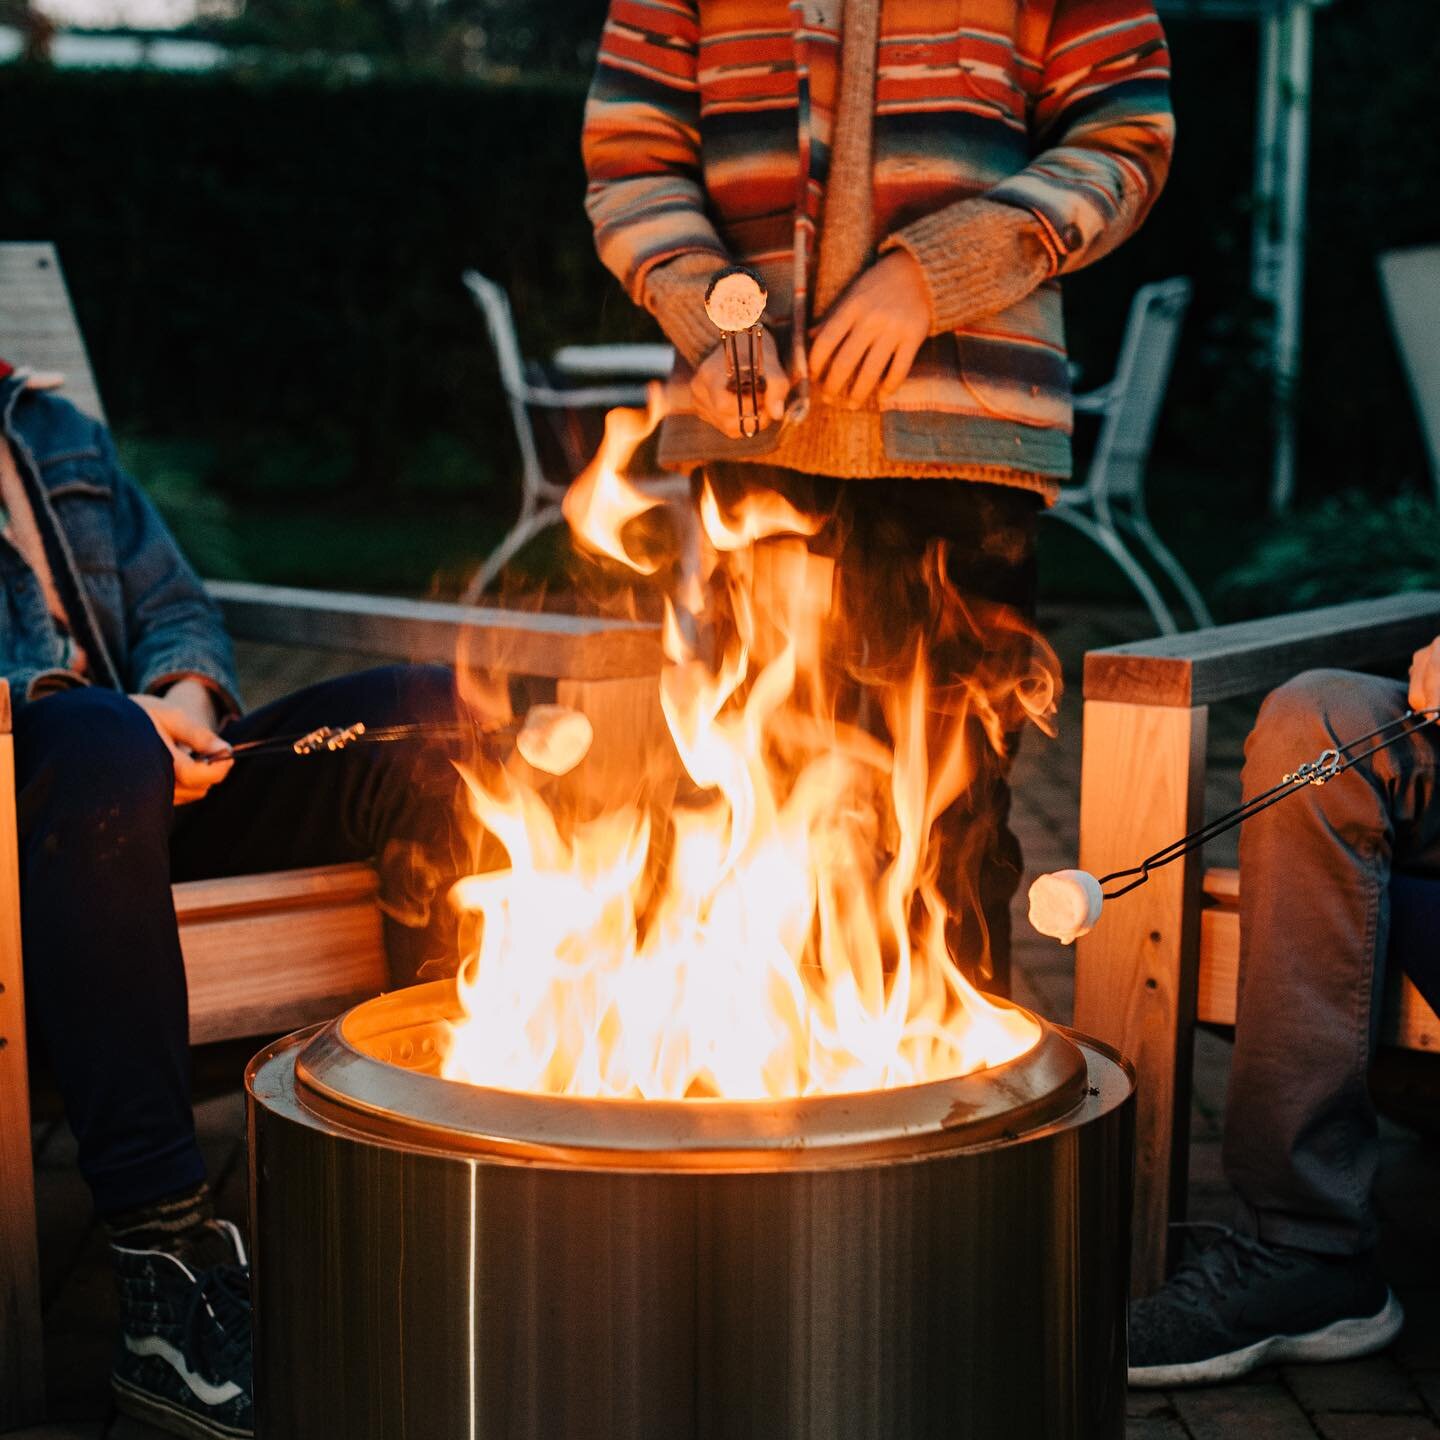 Indulge your sweet tooth with our delicious S&rsquo;mores kits. Create a gooey masterpiece around our fire pit and savor the magic of fall. 🍁 #smores #solostove 
.
.
.
#bellport #bellportvillage #boutiquehotel #homeawayfromhome #firepits #fallfun #w